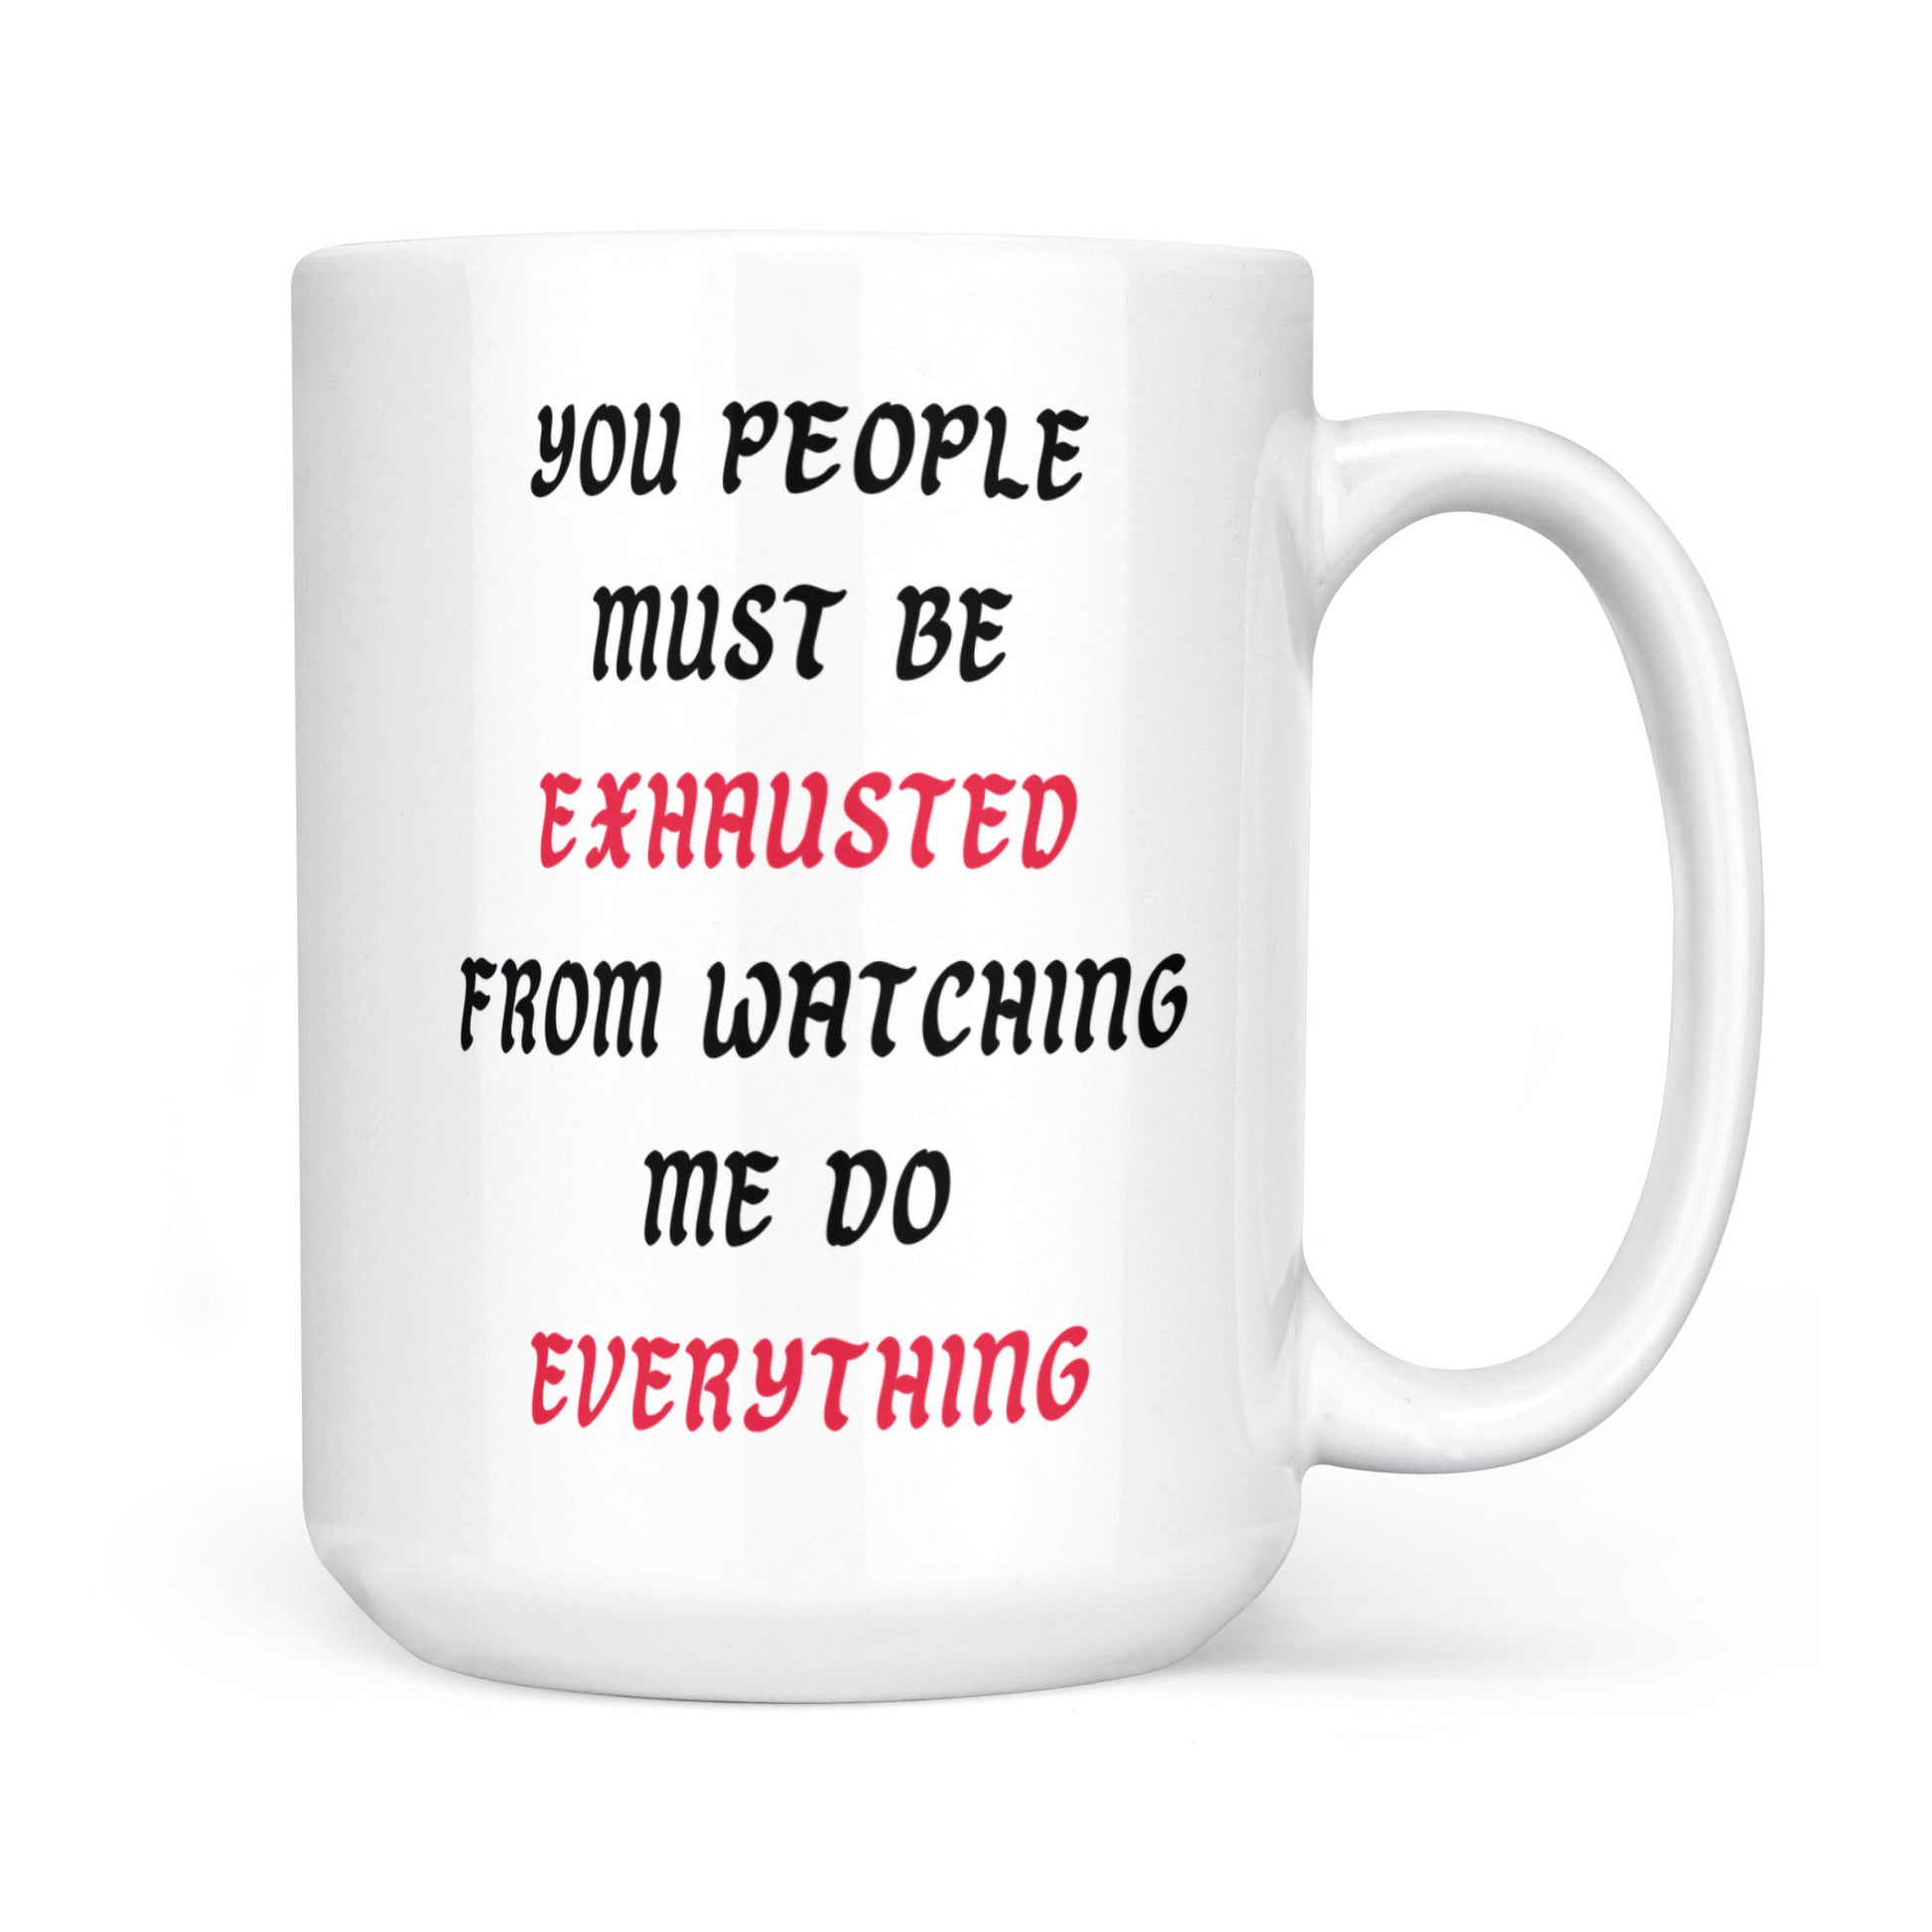 You People Must Be Exhausted From Watching Me Do Everything - Coffee Mug